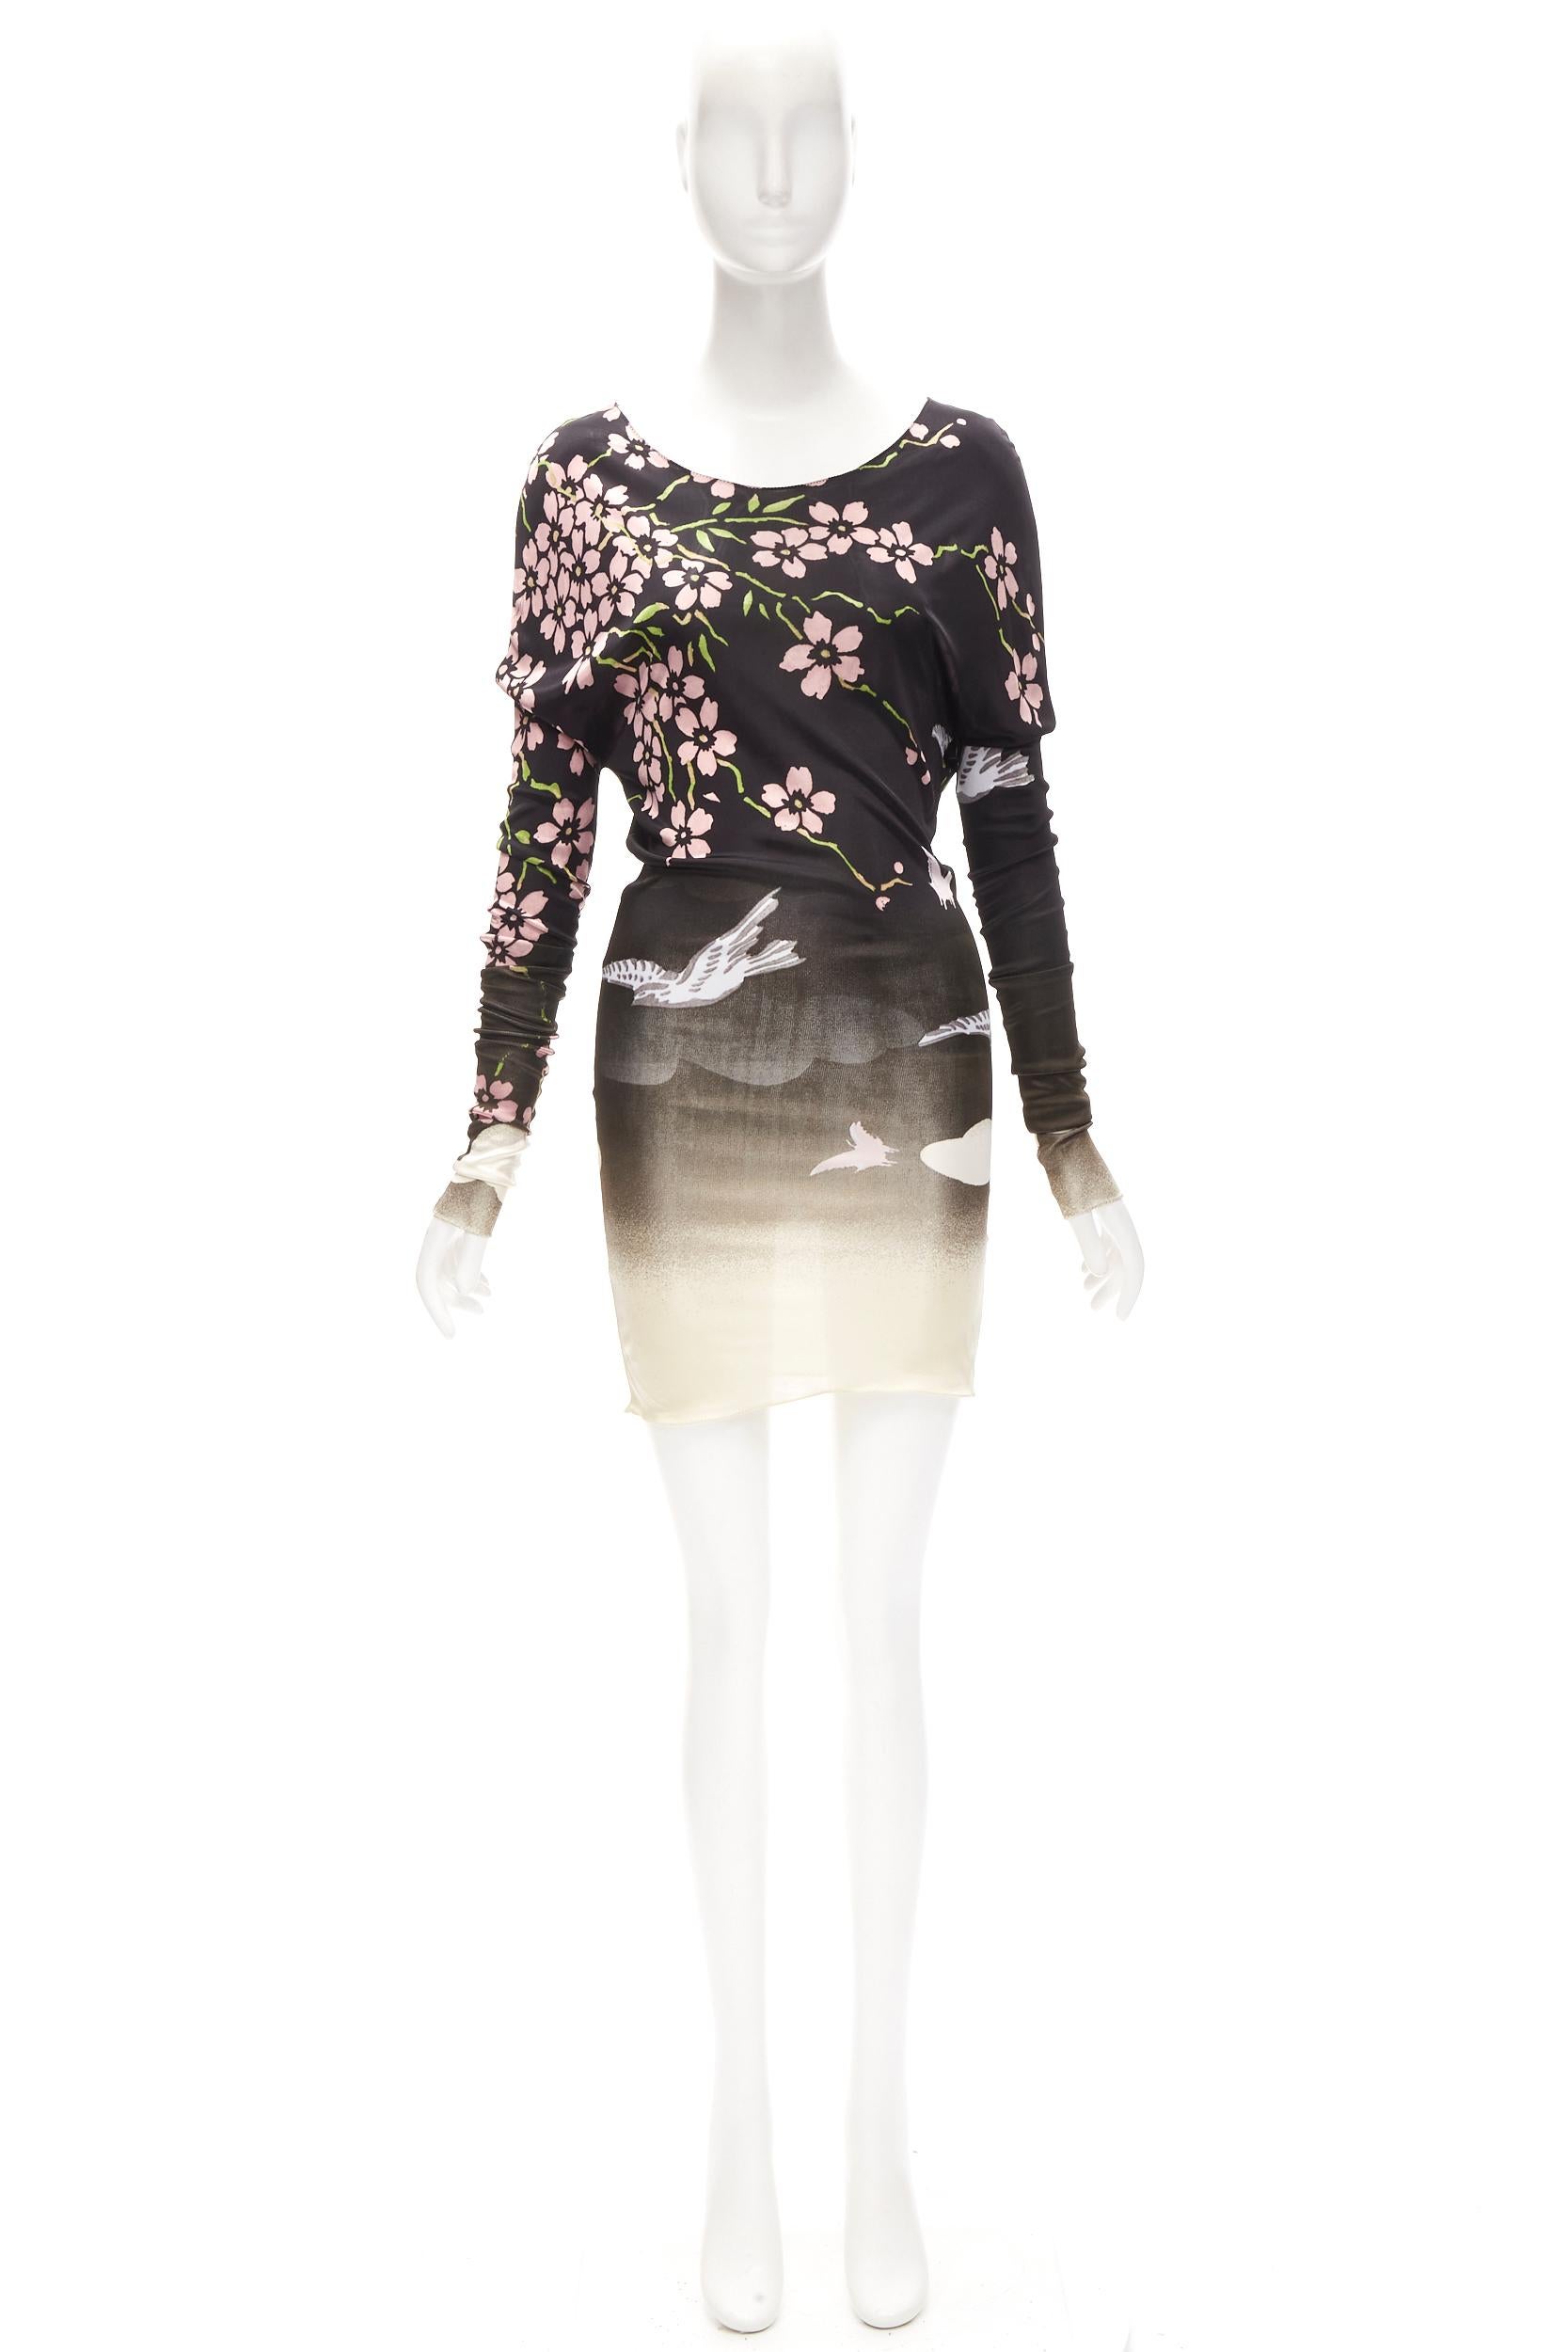 GUCCI TOM FORD 2003 black Japanese Cherry Blossom bodycon dress XS For Sale 3